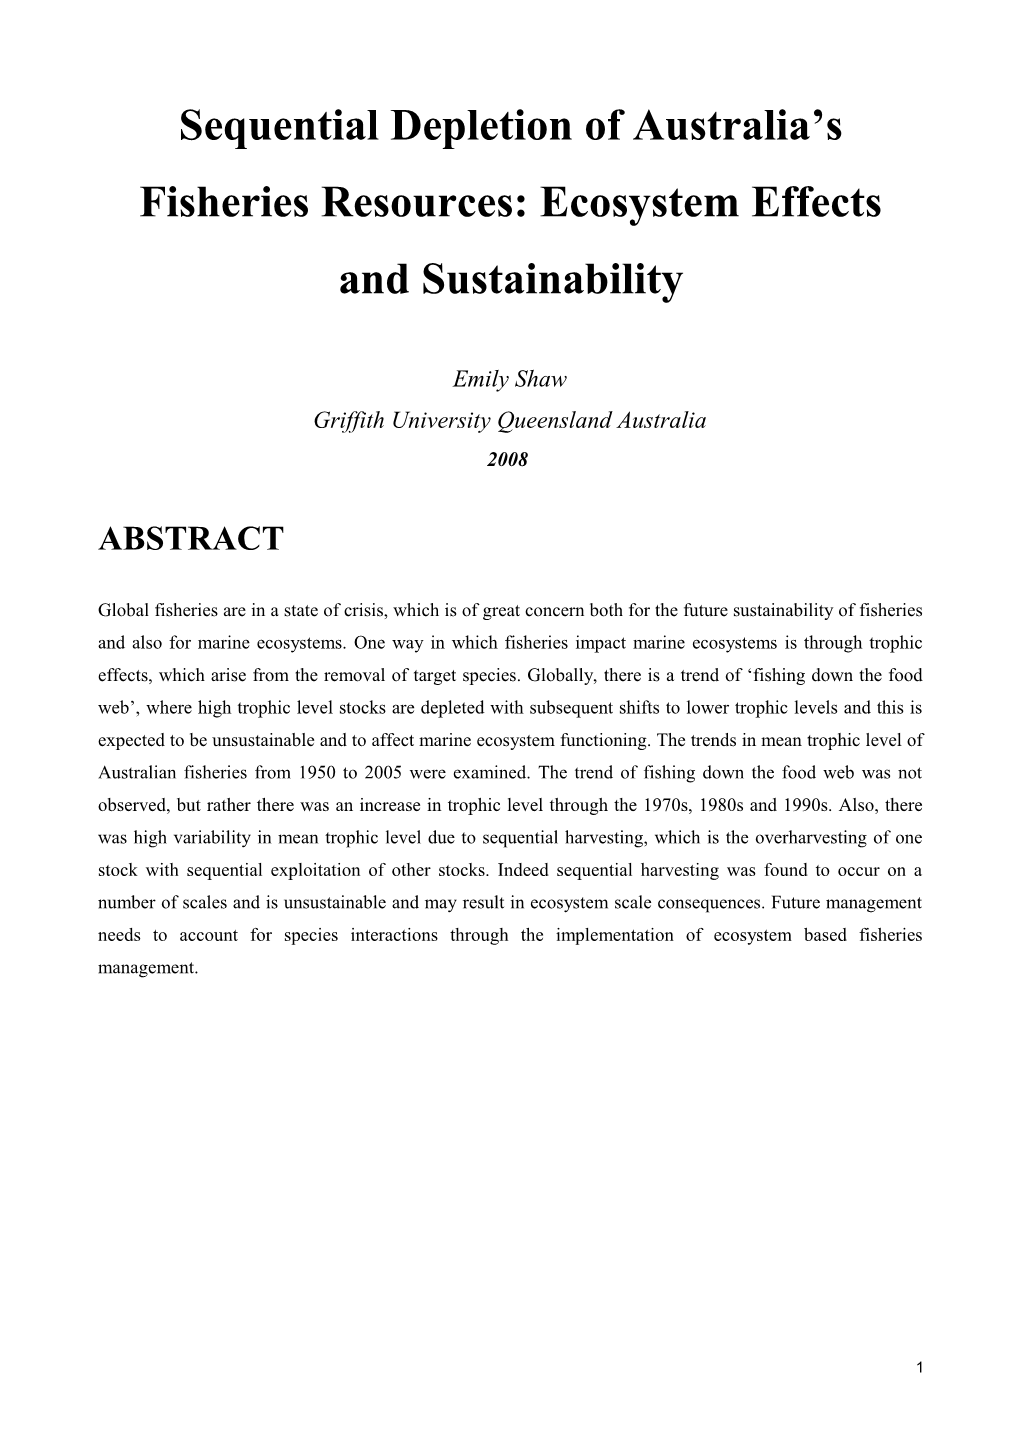 Sequential Depletion of Australia S Fisheries Resources: Ecosystem Effects and Sustainability